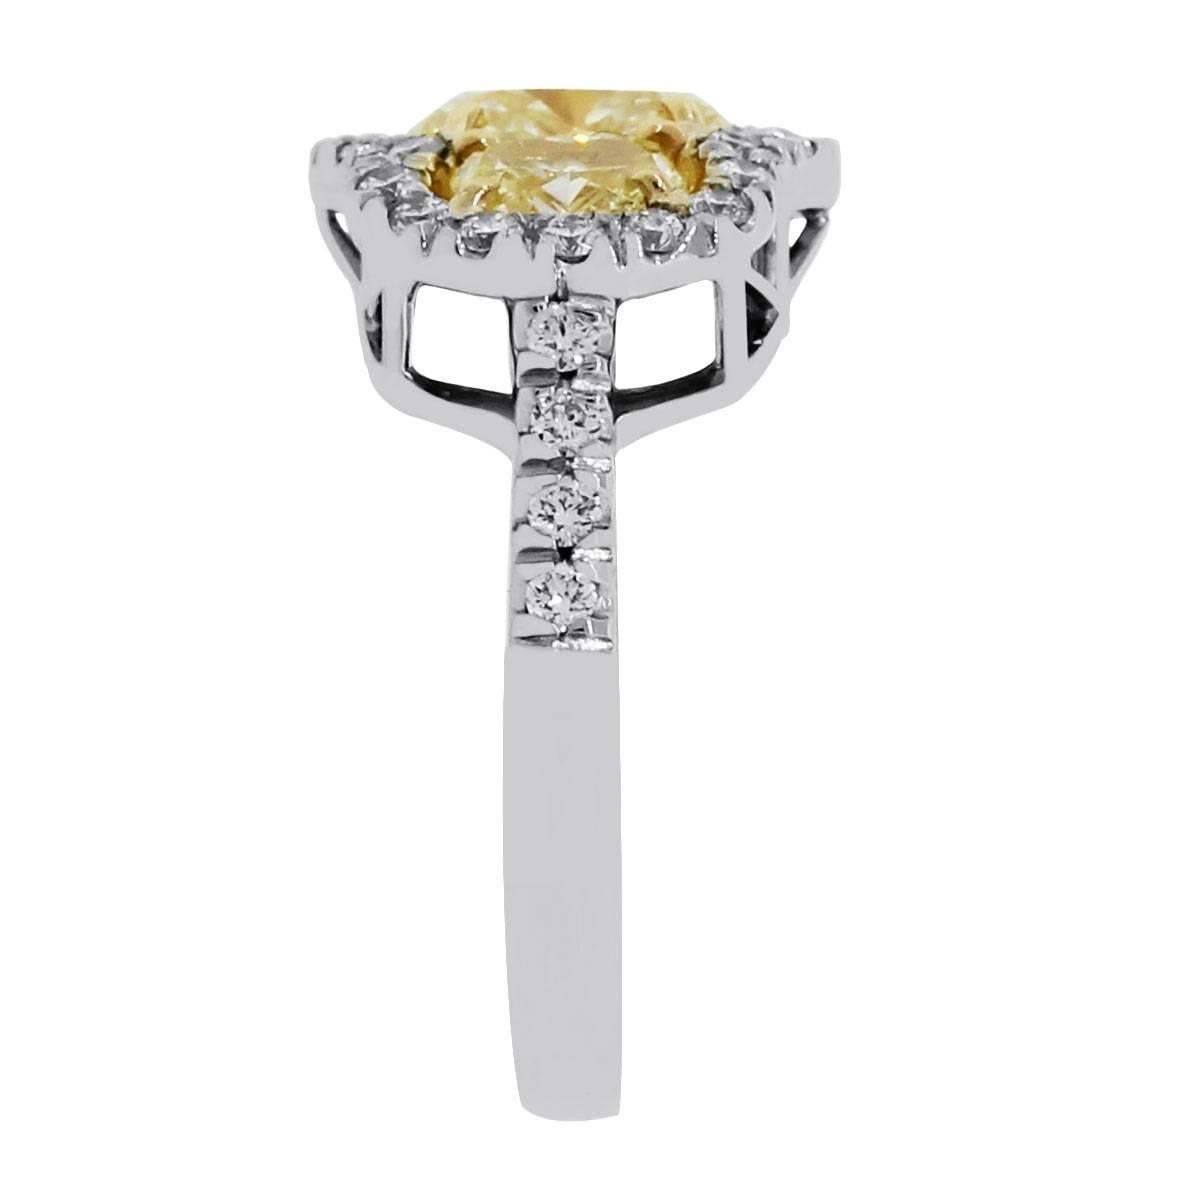 Material: 18k white gold
Diamond Details: Center oval fancy yellow diamond is approximately 1.51ctw, 2 oval yellow diamonds approximately 0.99ctw, and approximately 0.64ctw round brilliant diamonds. White diamonds are G/H in color and VS in clarity.